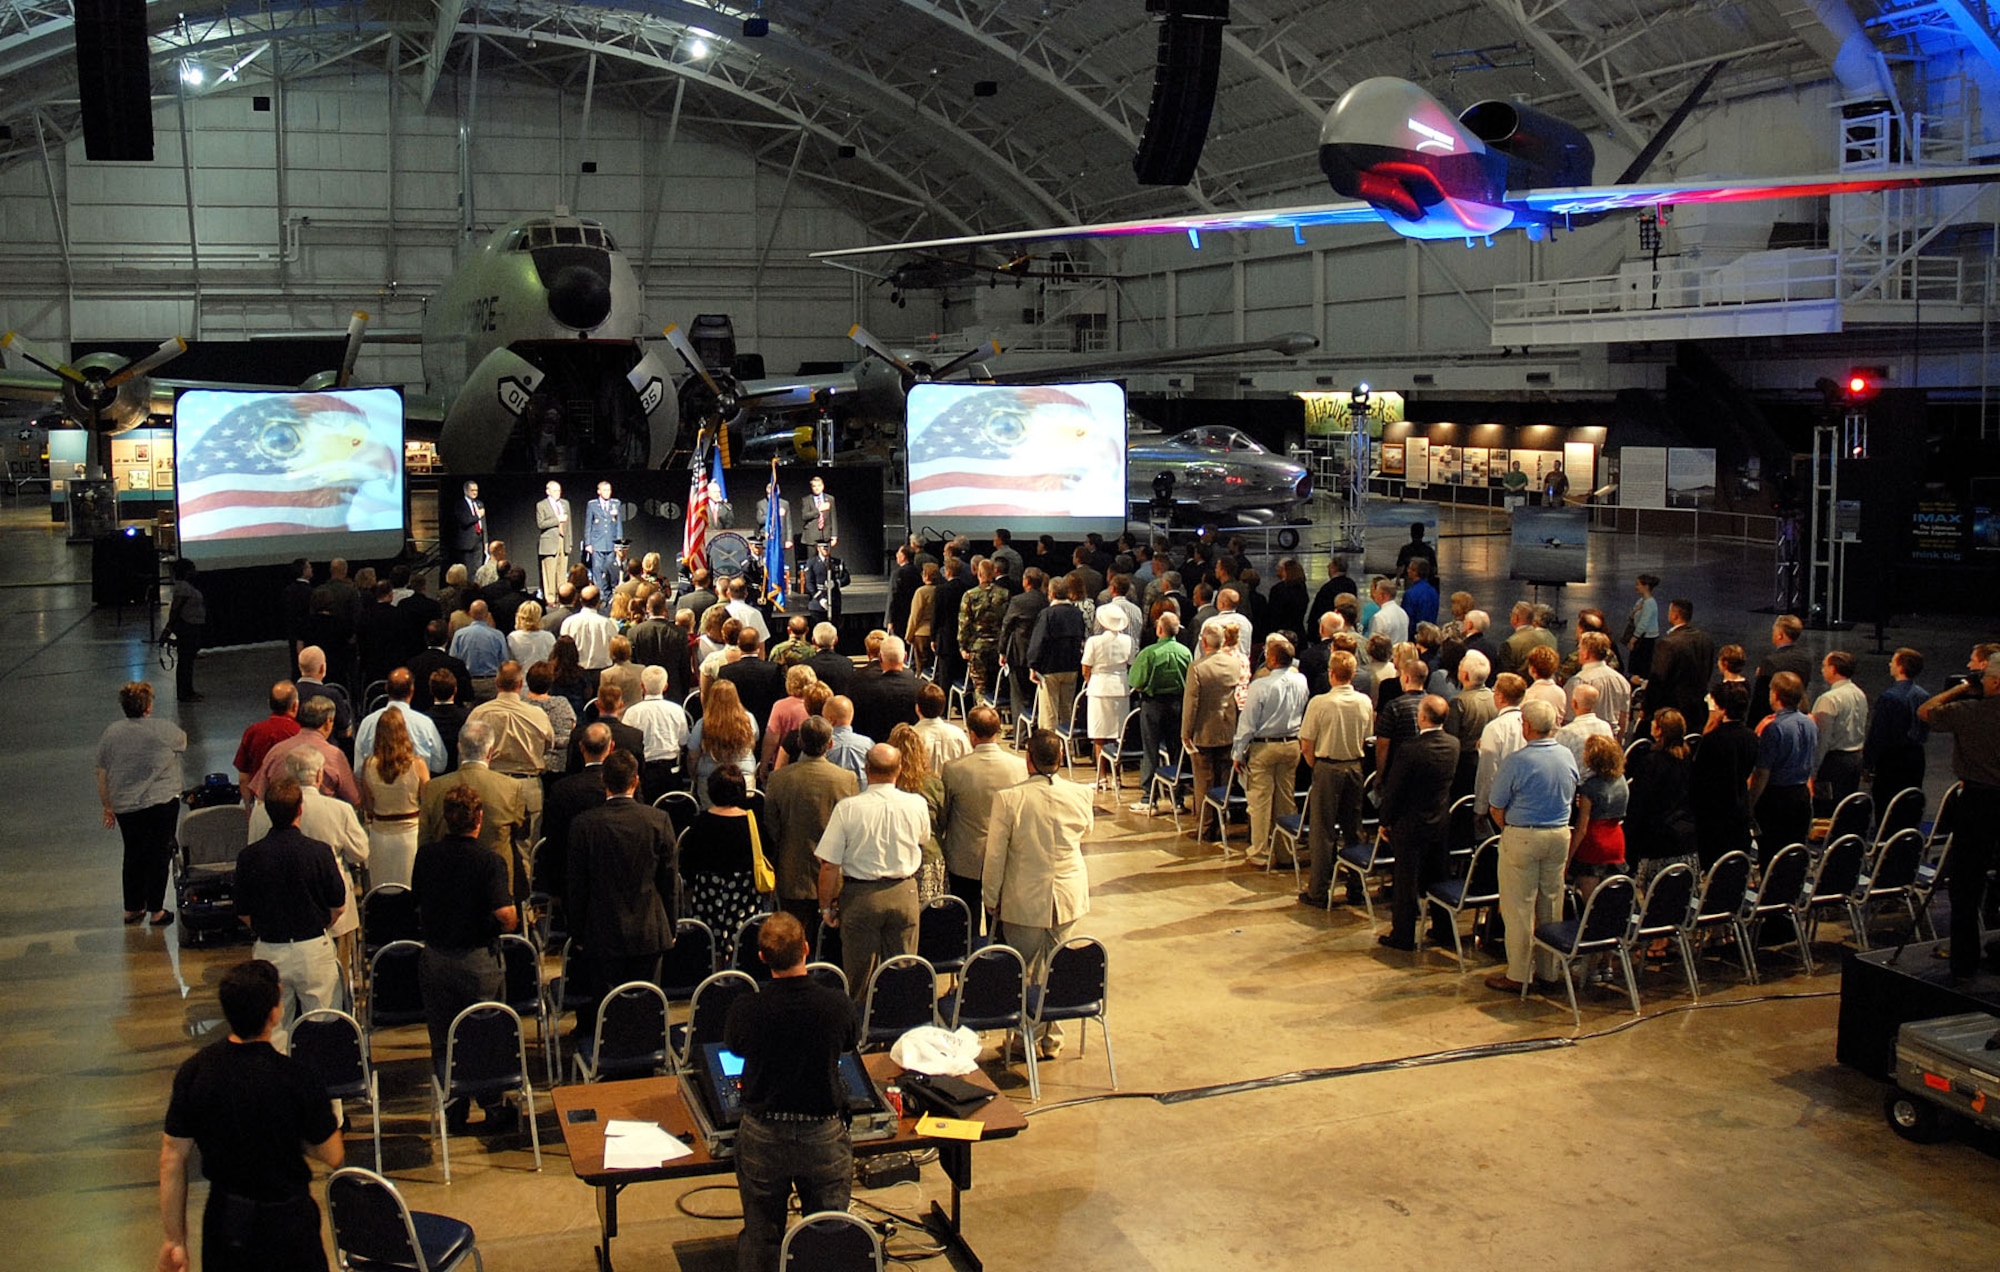 DAYTON, Ohio (08/2008) -- Air Force, Northrop Grumman and museum officials participate in the Global Hawk exhibit opening at the National Museum of the United States Air Force. (U.S. Air Force photo)